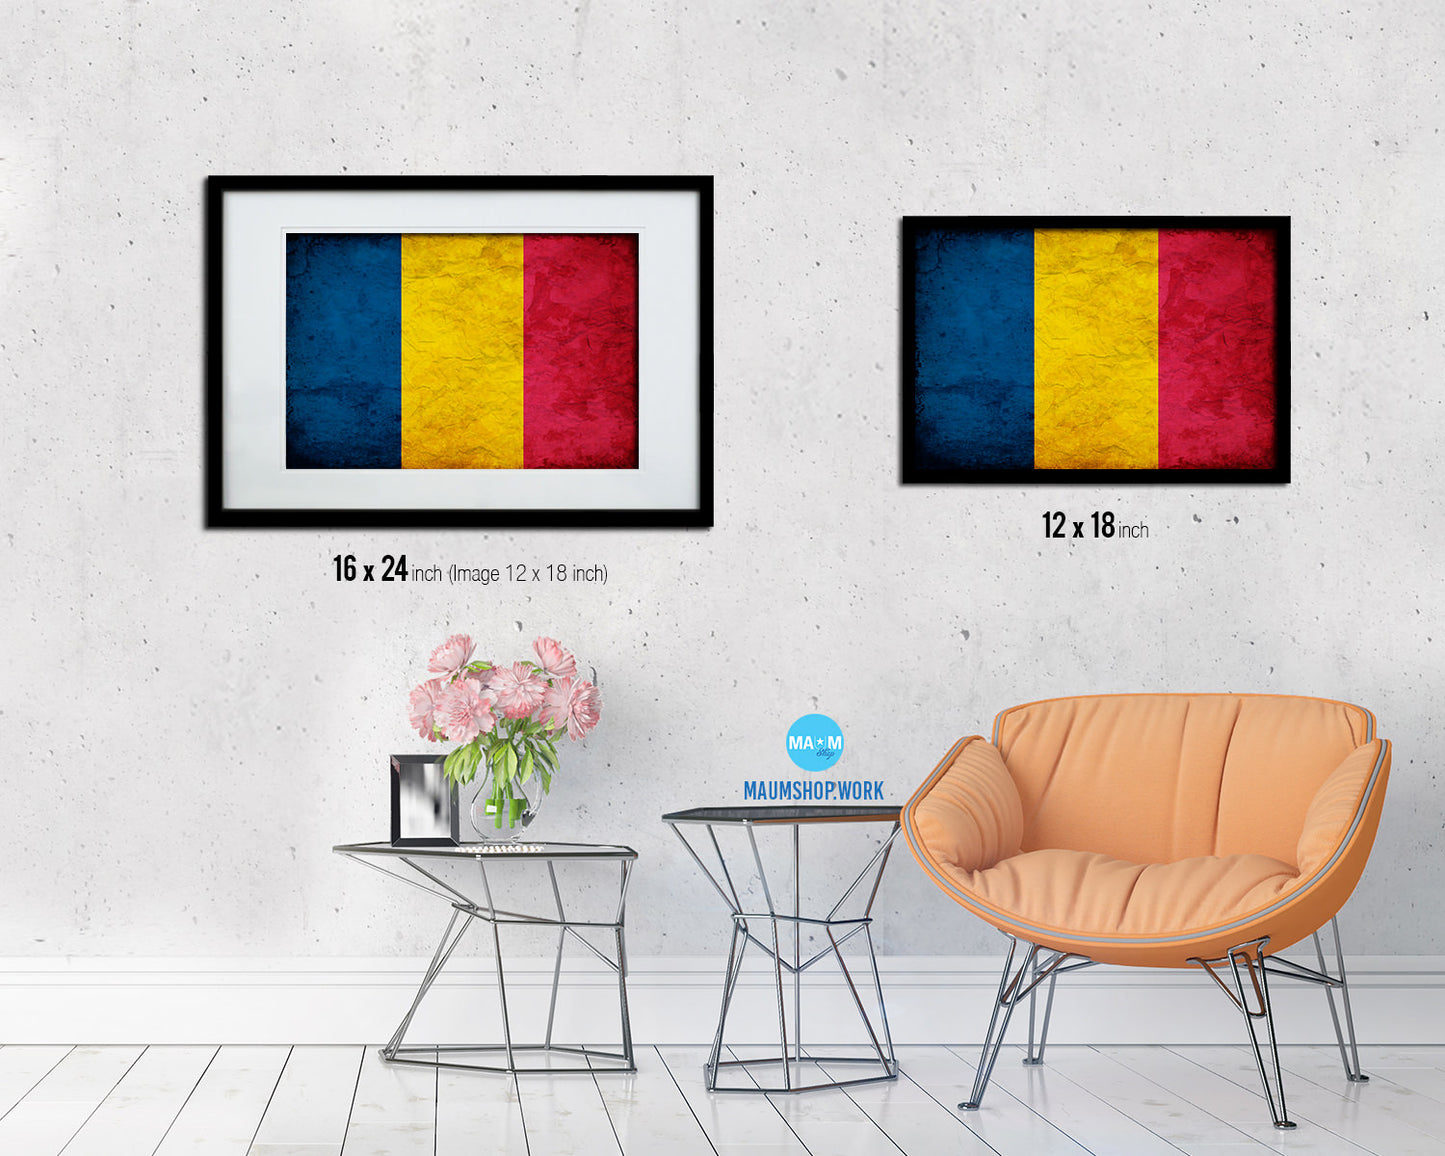 Chad Country Vintage Flag Wood Framed Print Wall Art Decor Gifts